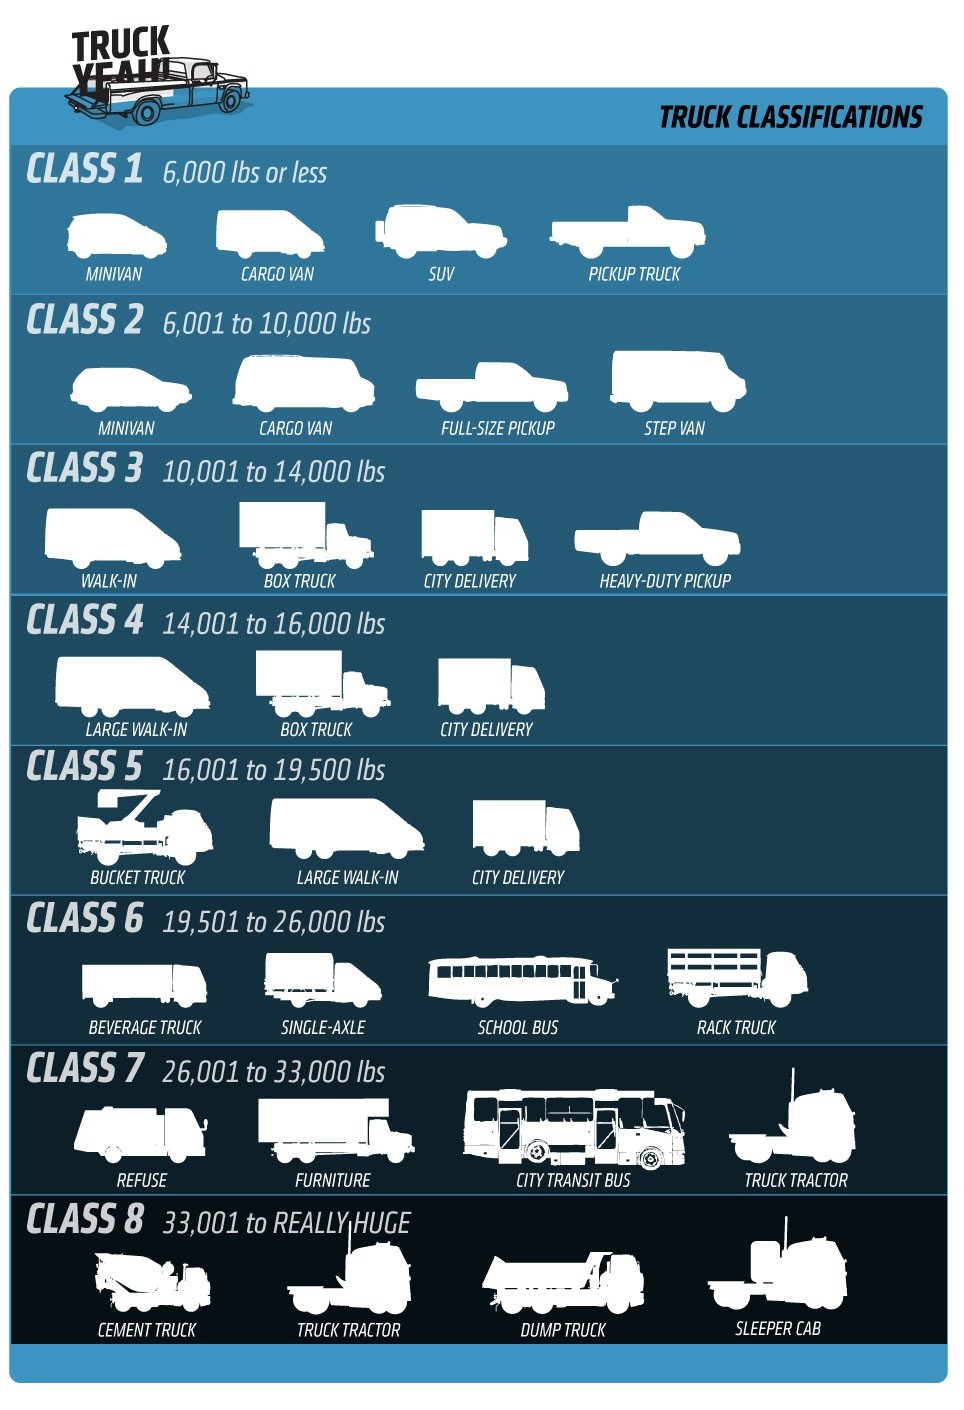 Truck Classifications Image58